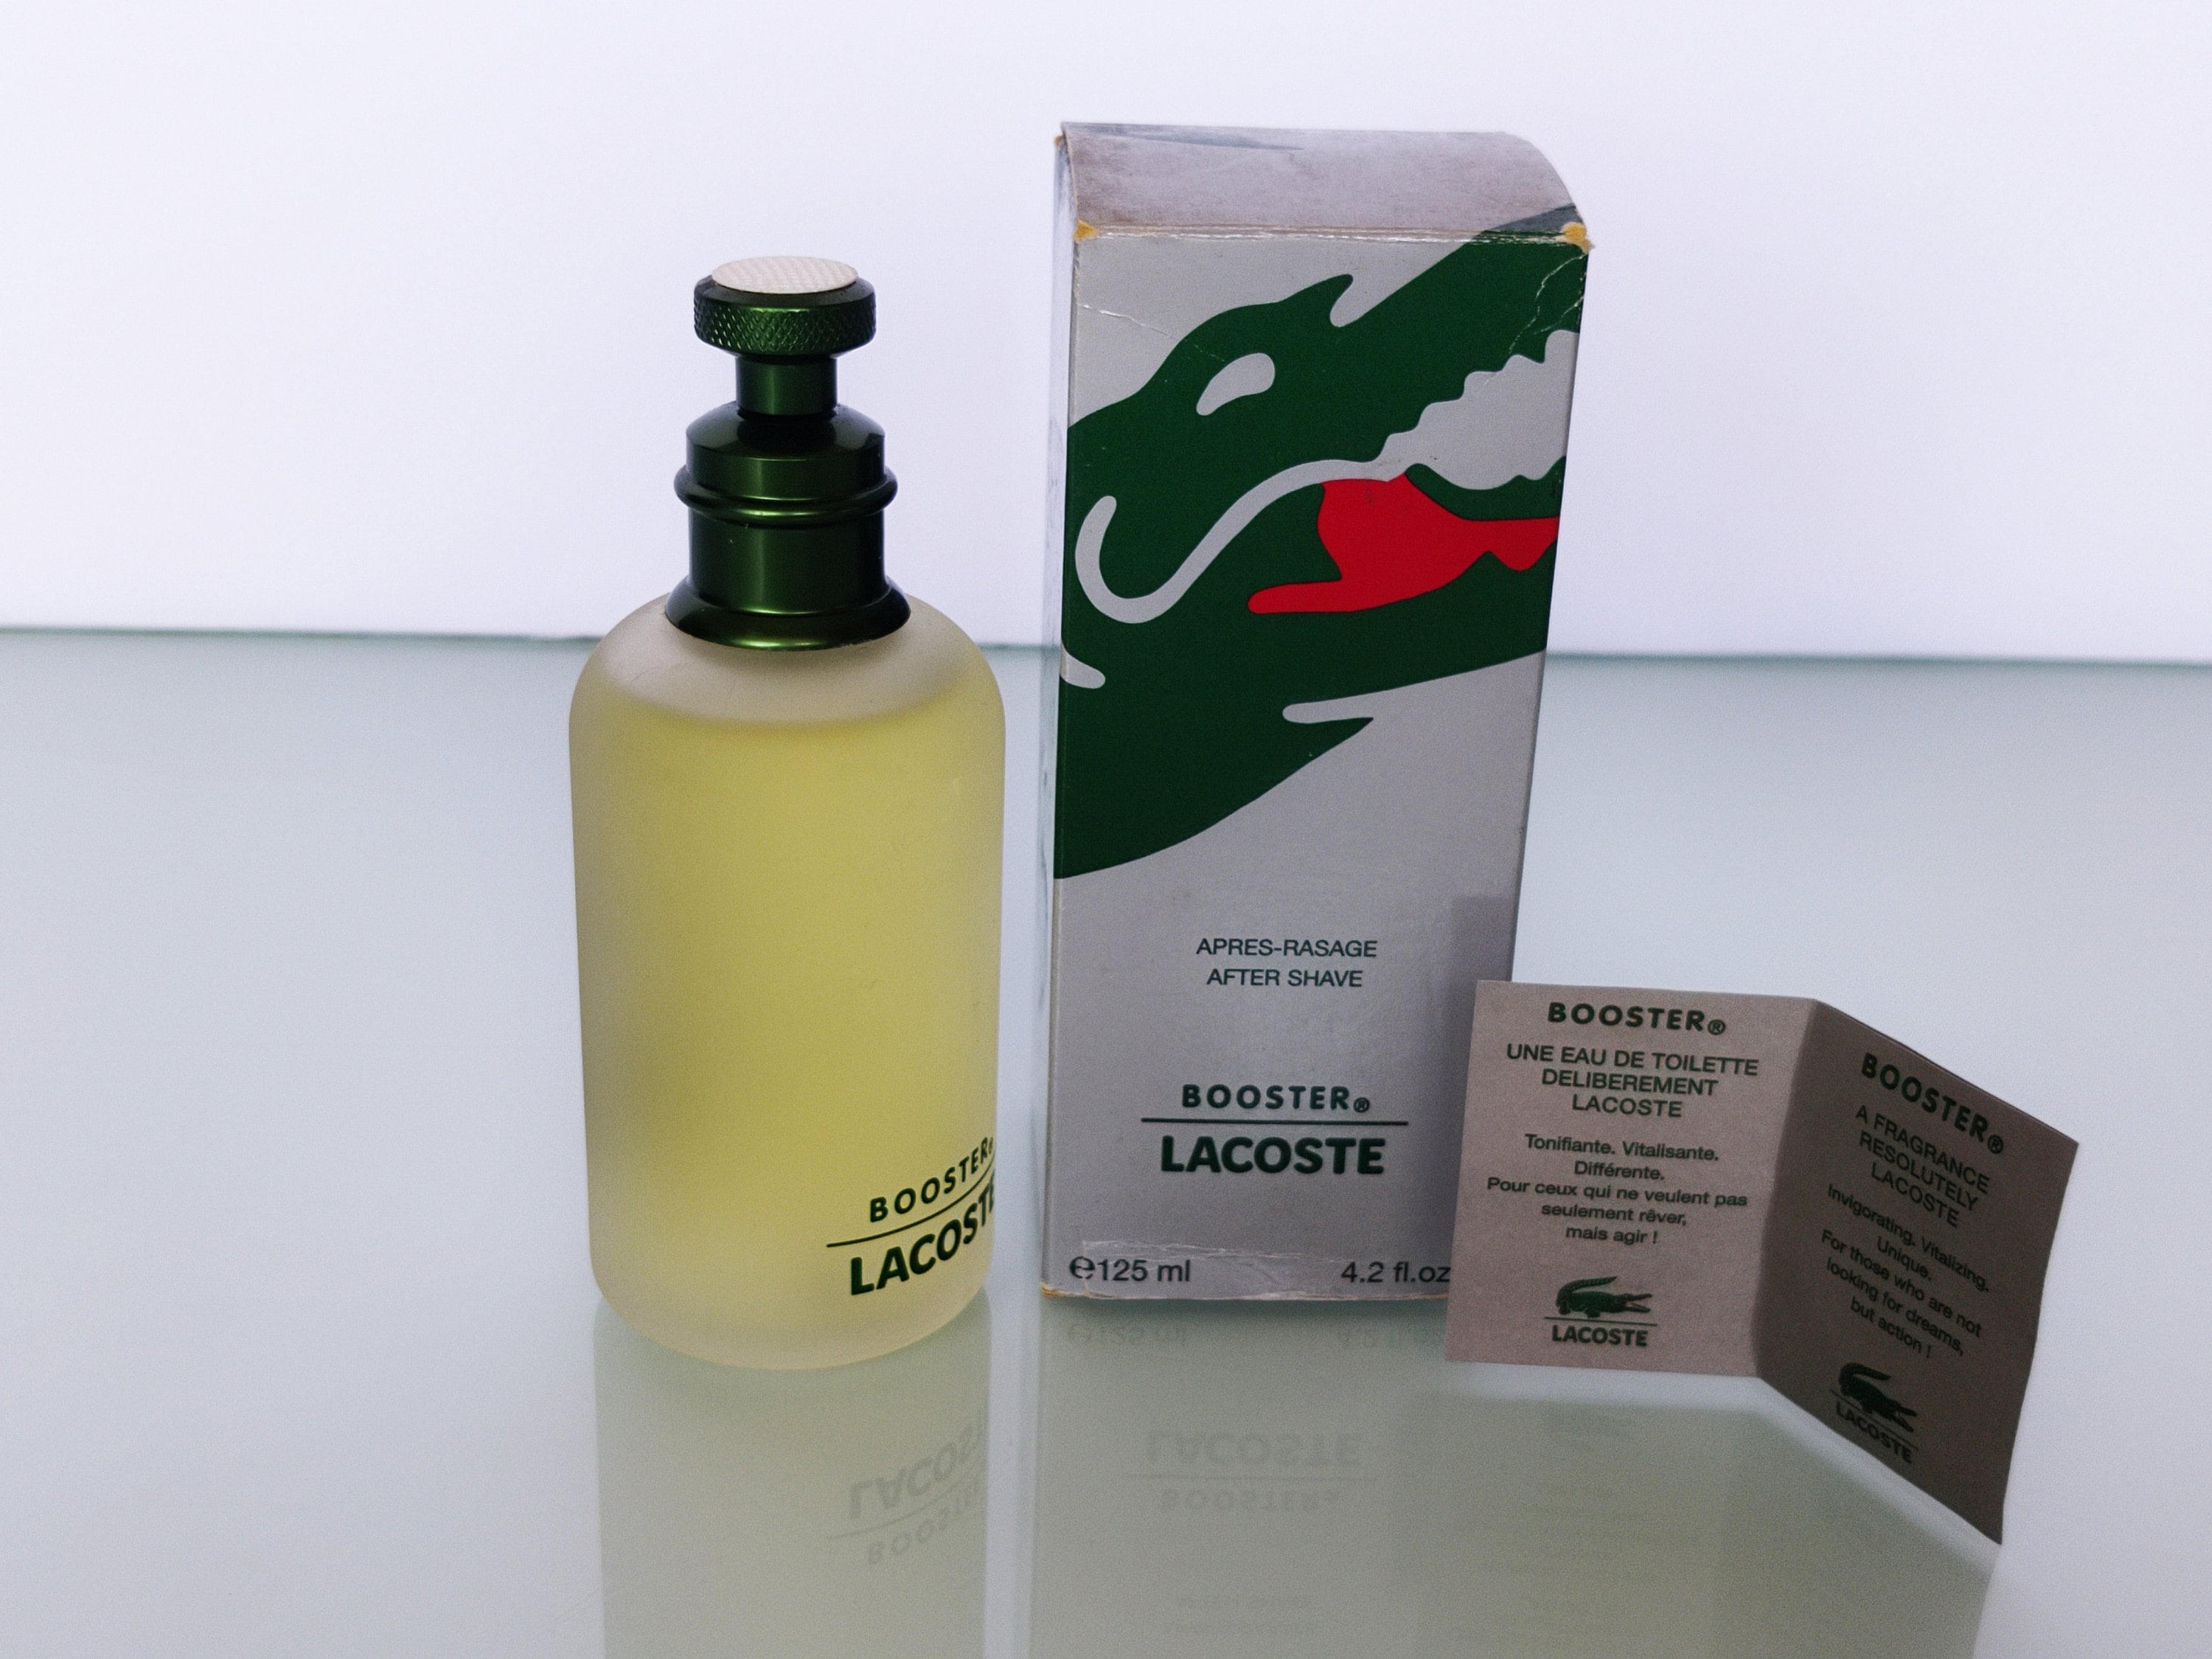 1996 by Lacoste After Shave 125 Ml/4.2 Fl.oz. - Etsy Norway